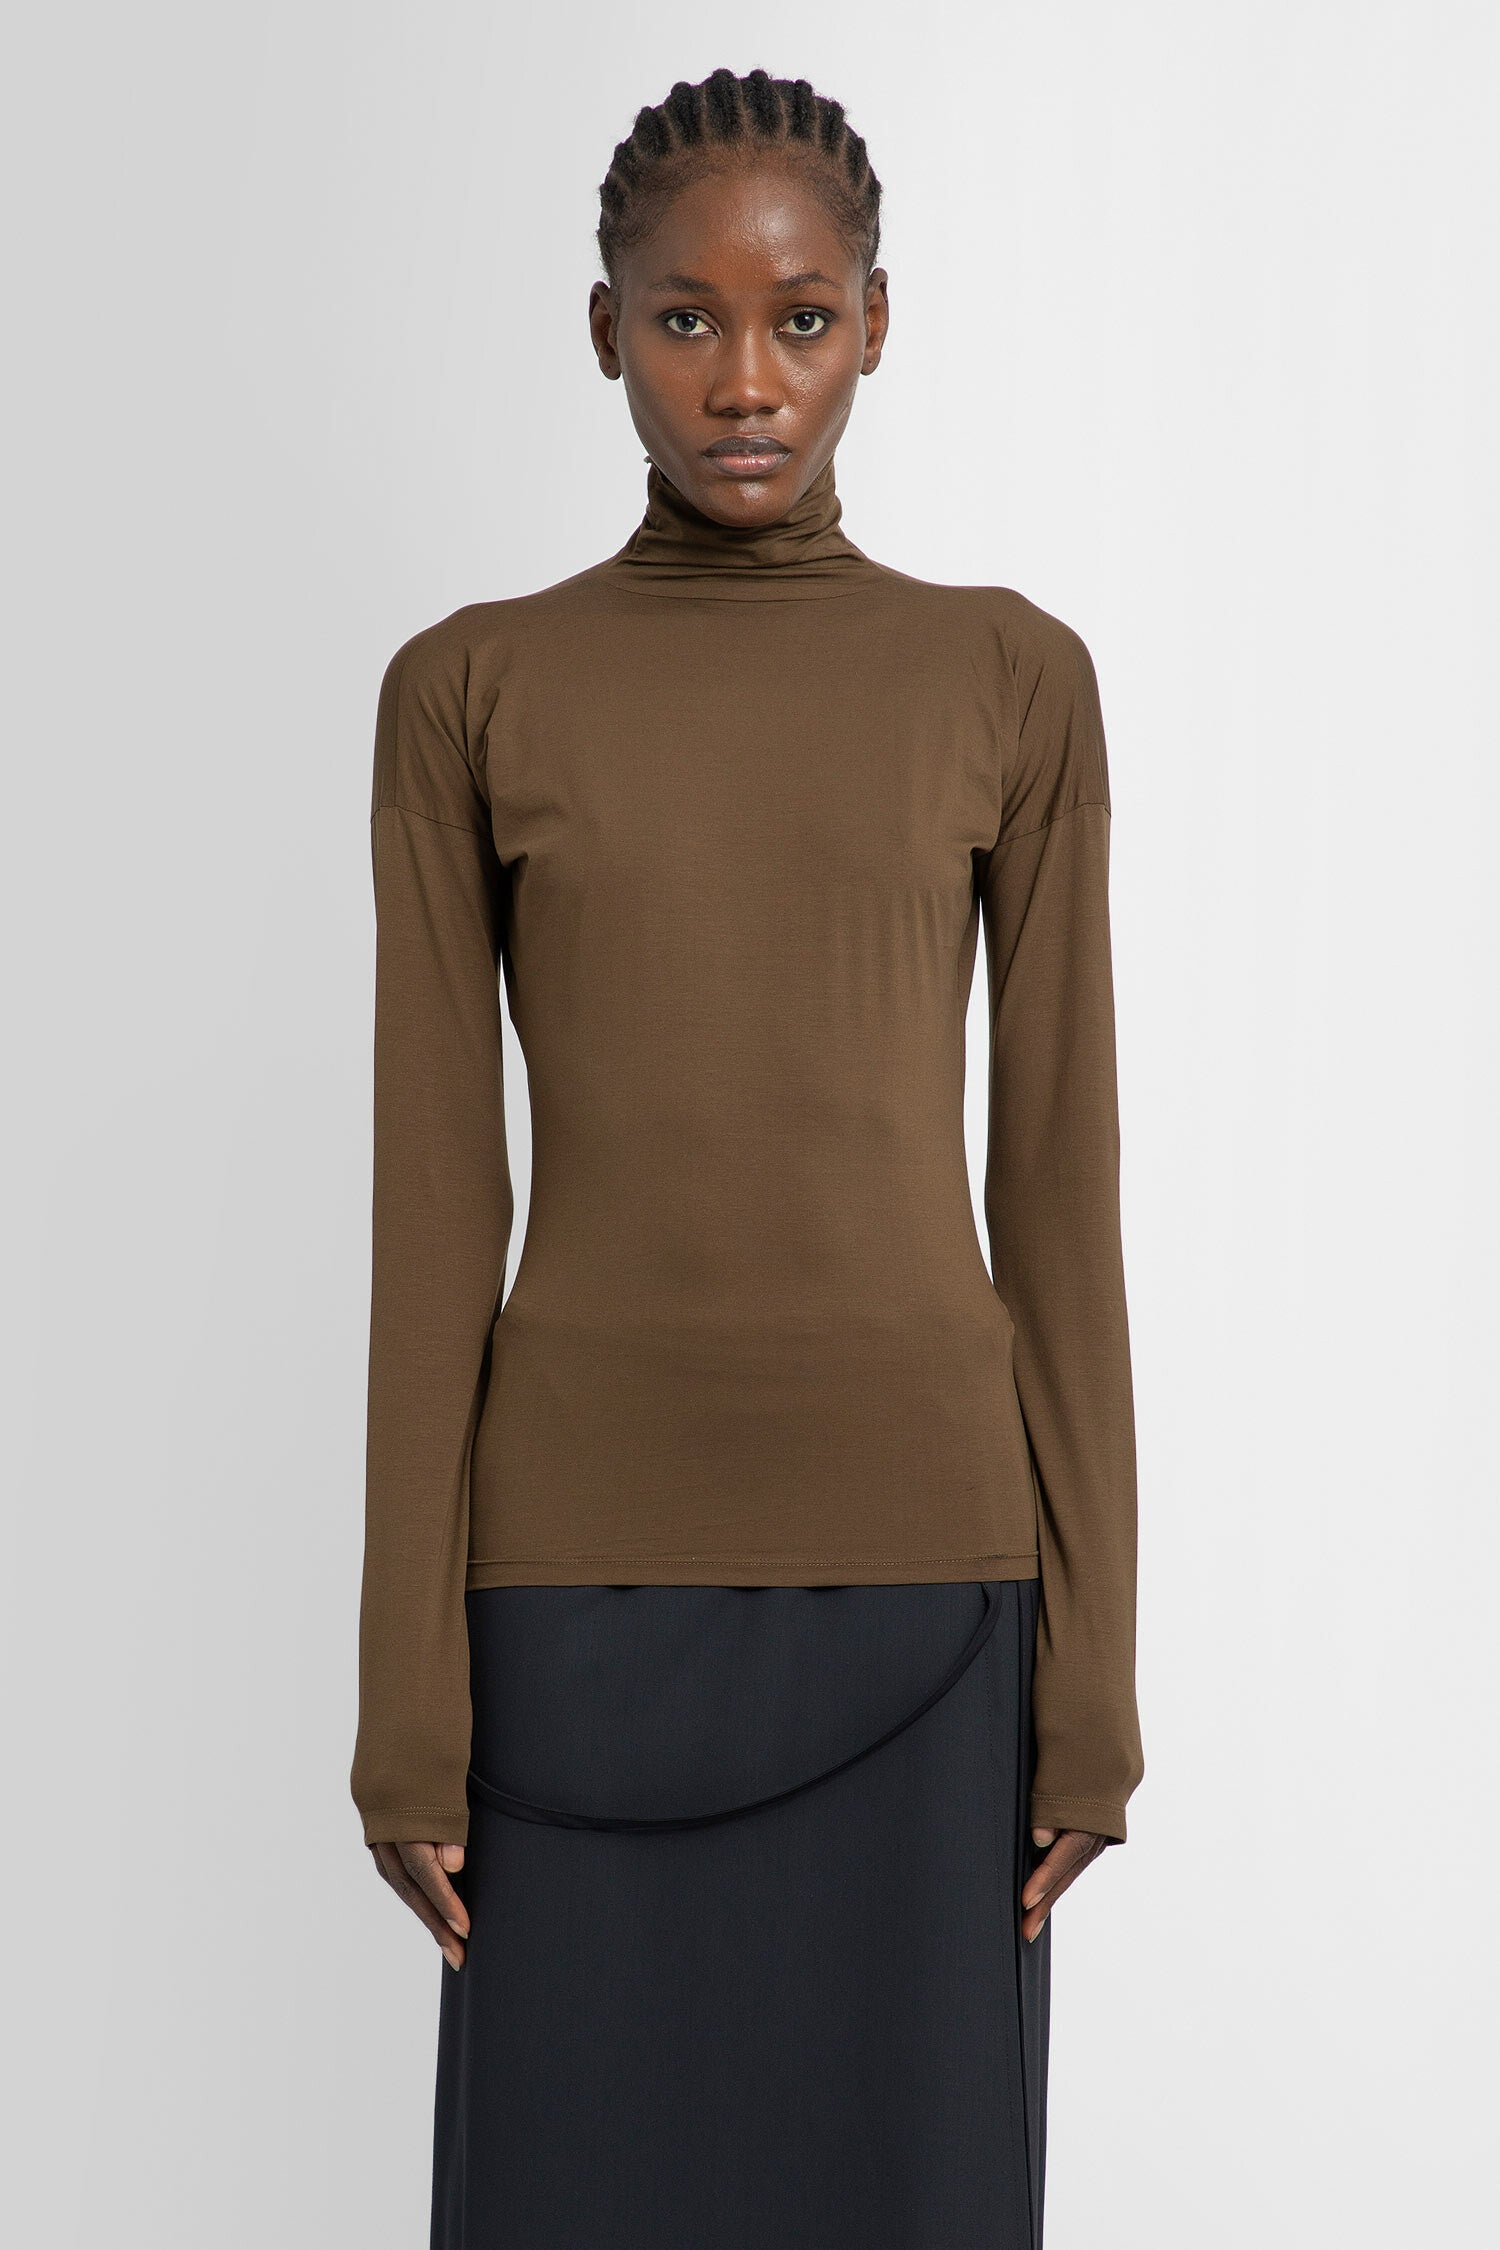 LEMAIRE WOMAN BROWN TOPS